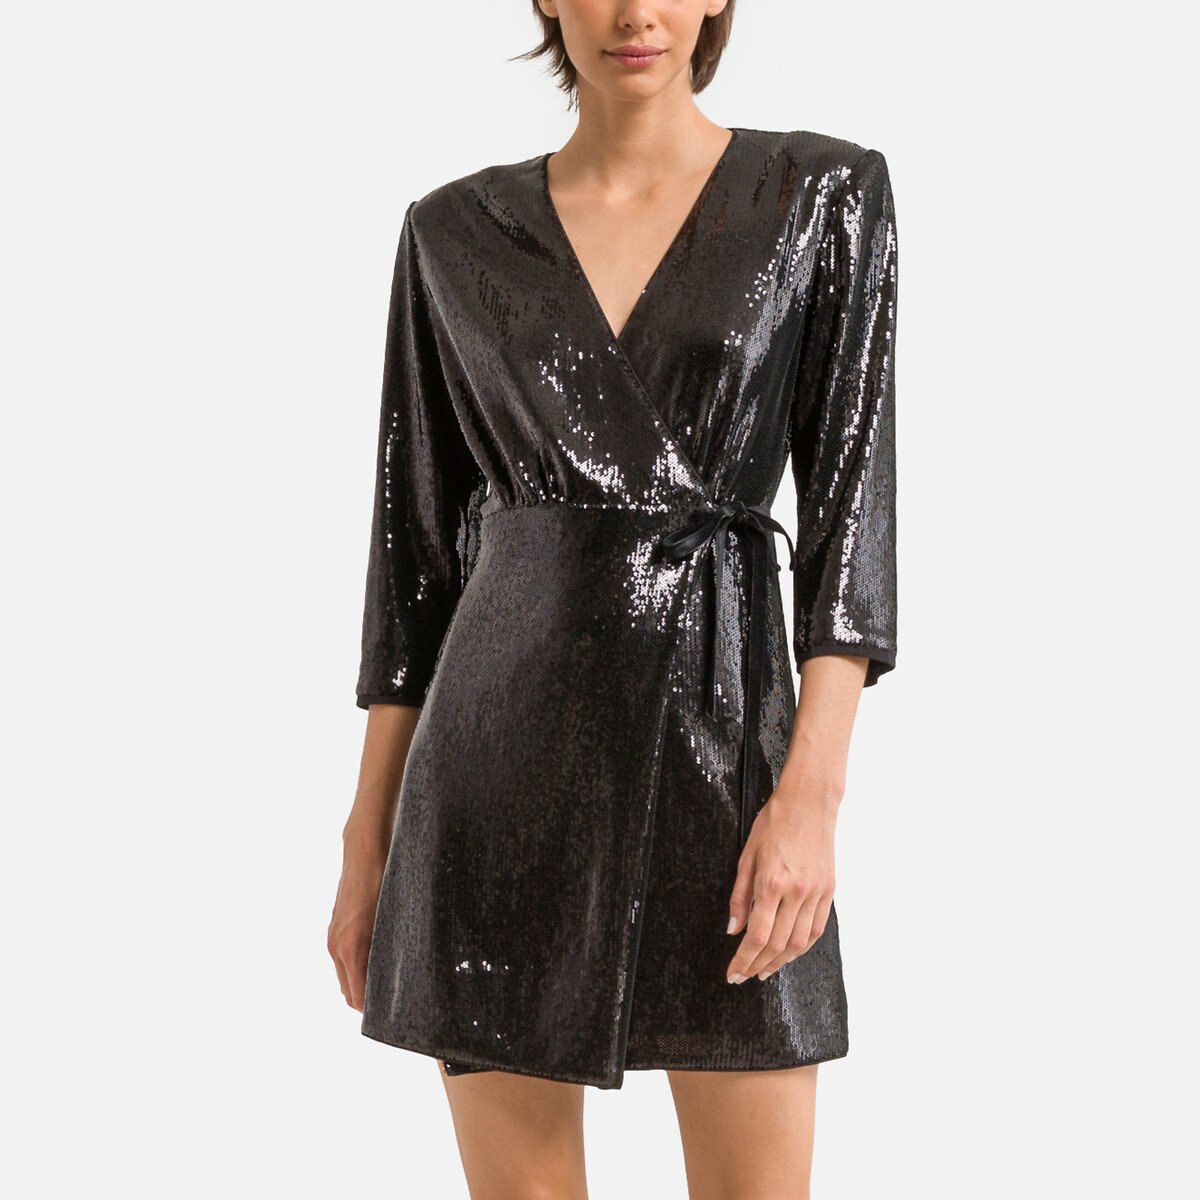 Cliff Sequin Mini Dress with V-Neck and 3/4 Length Sleeves